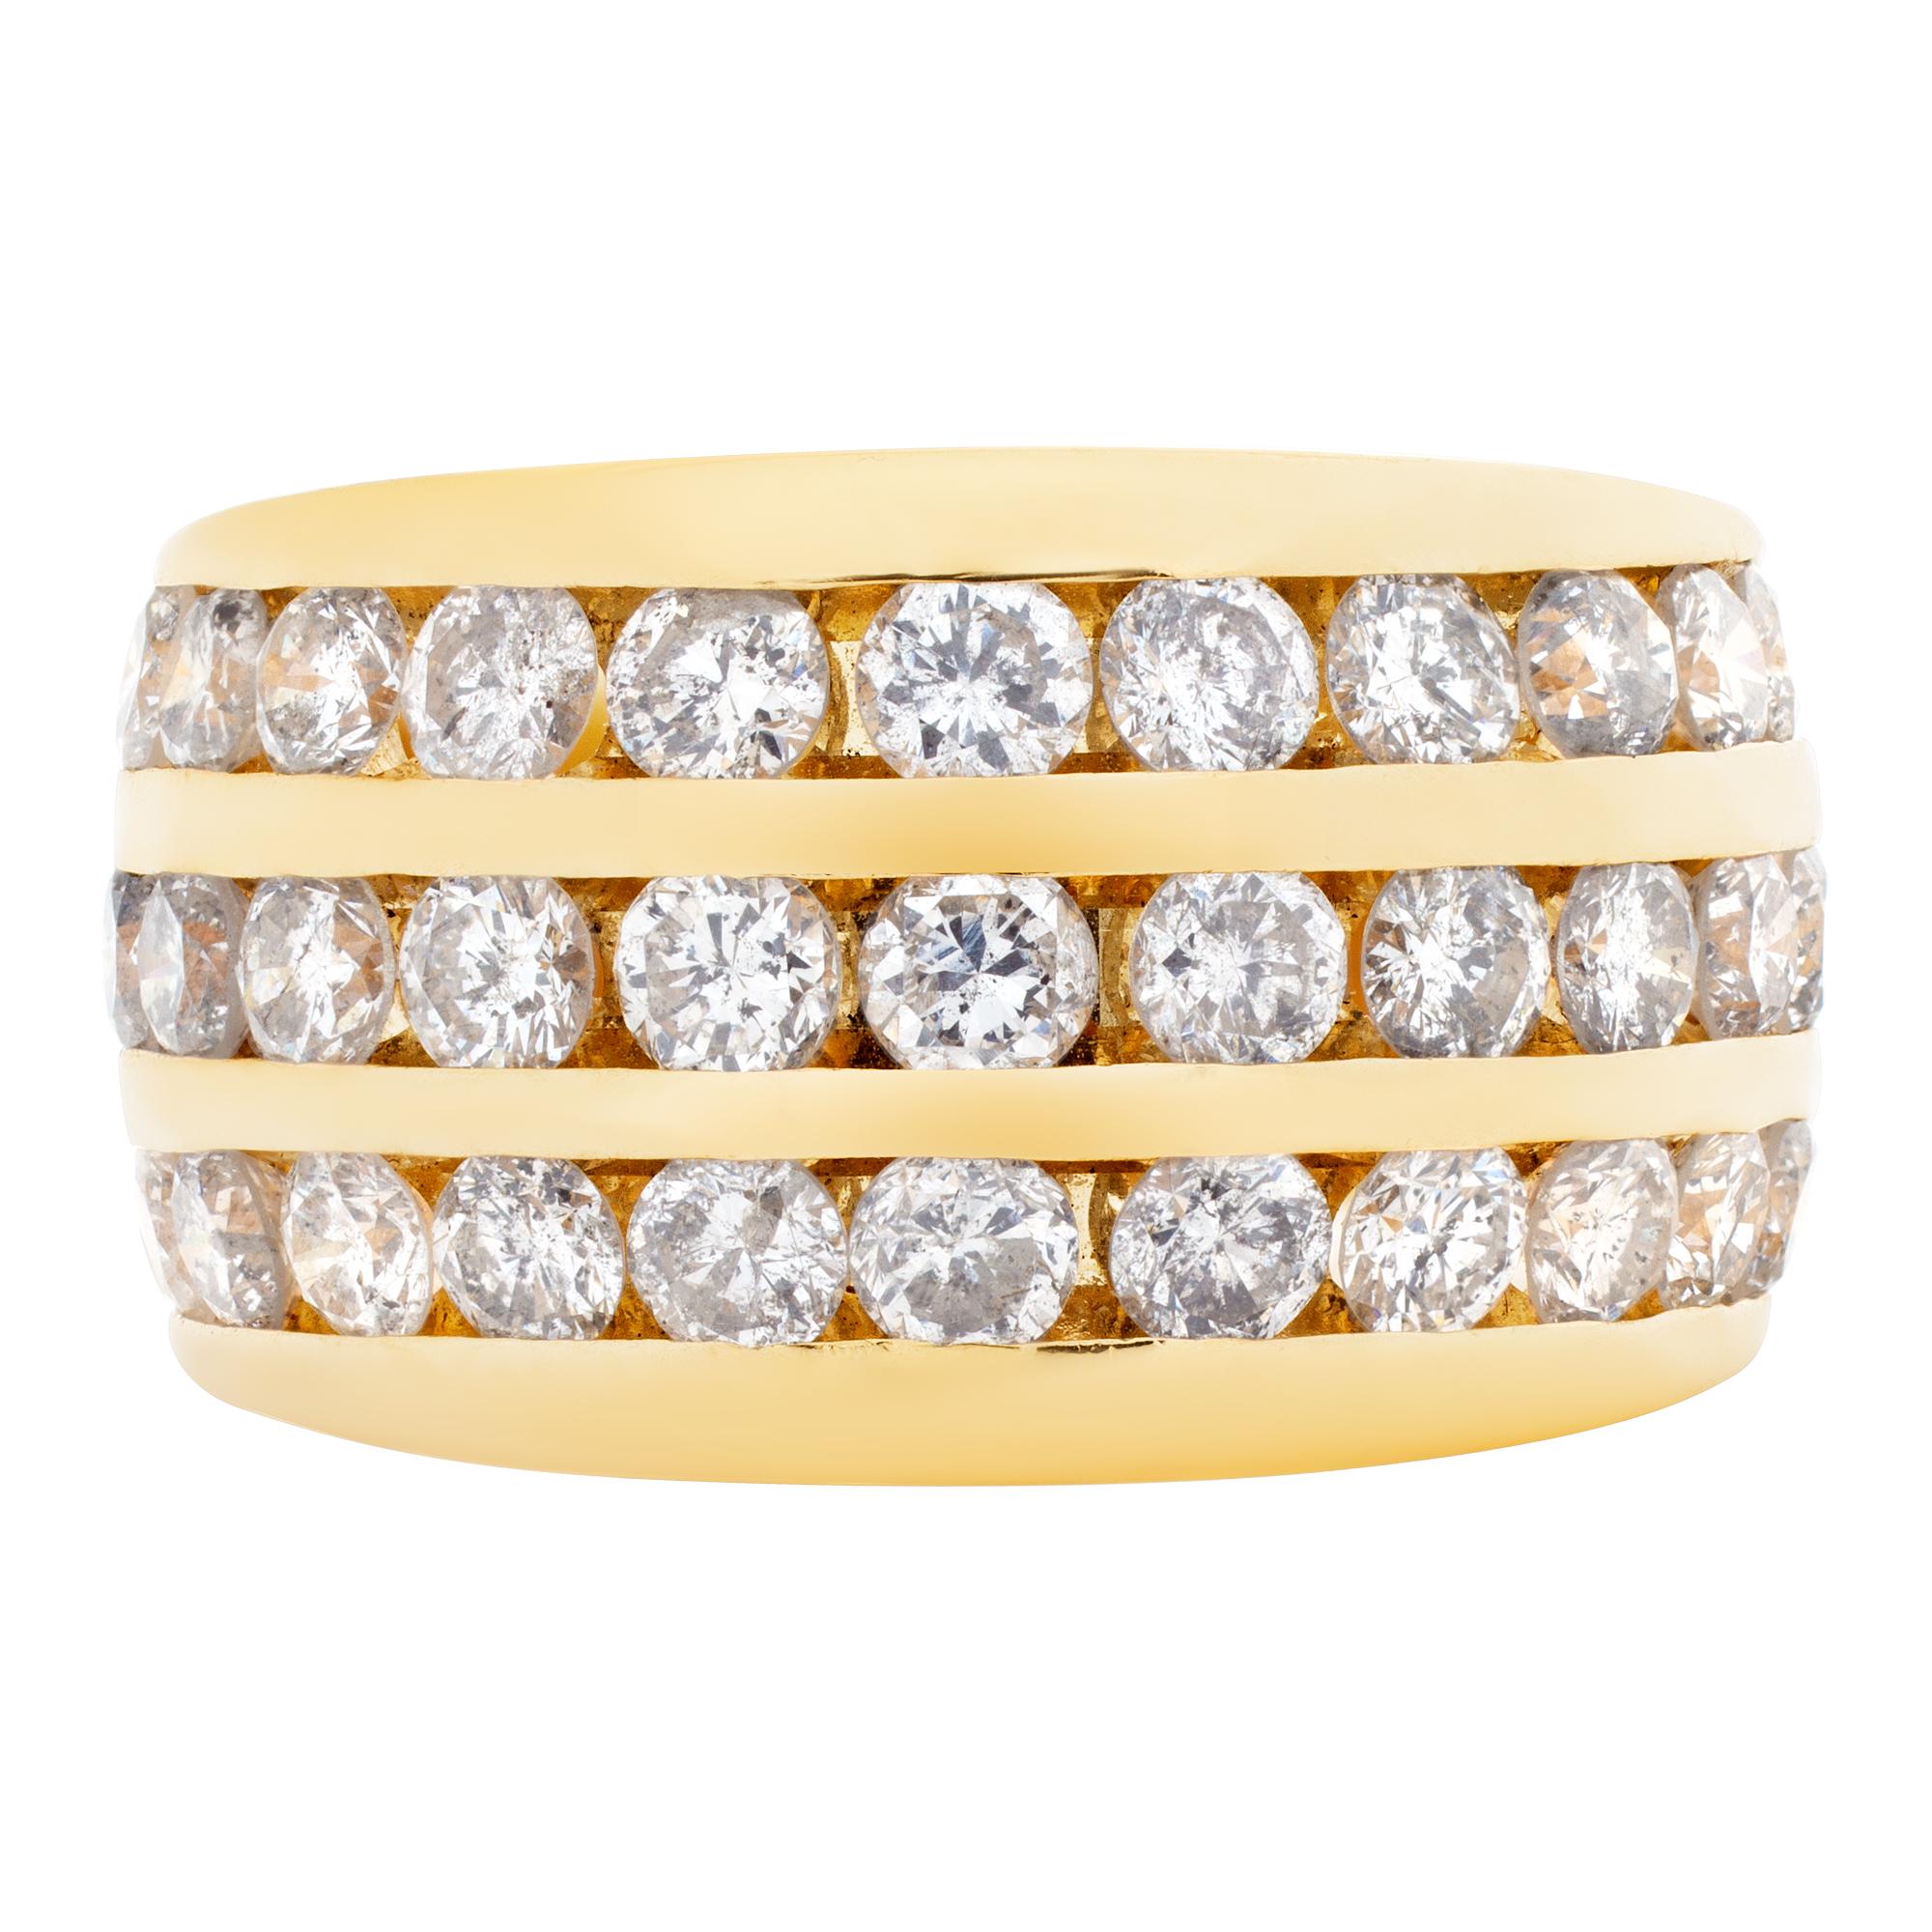 Wide ring band in 14k with approximately 1.50 carats in 3 rows of channel set diamonds. 0.44